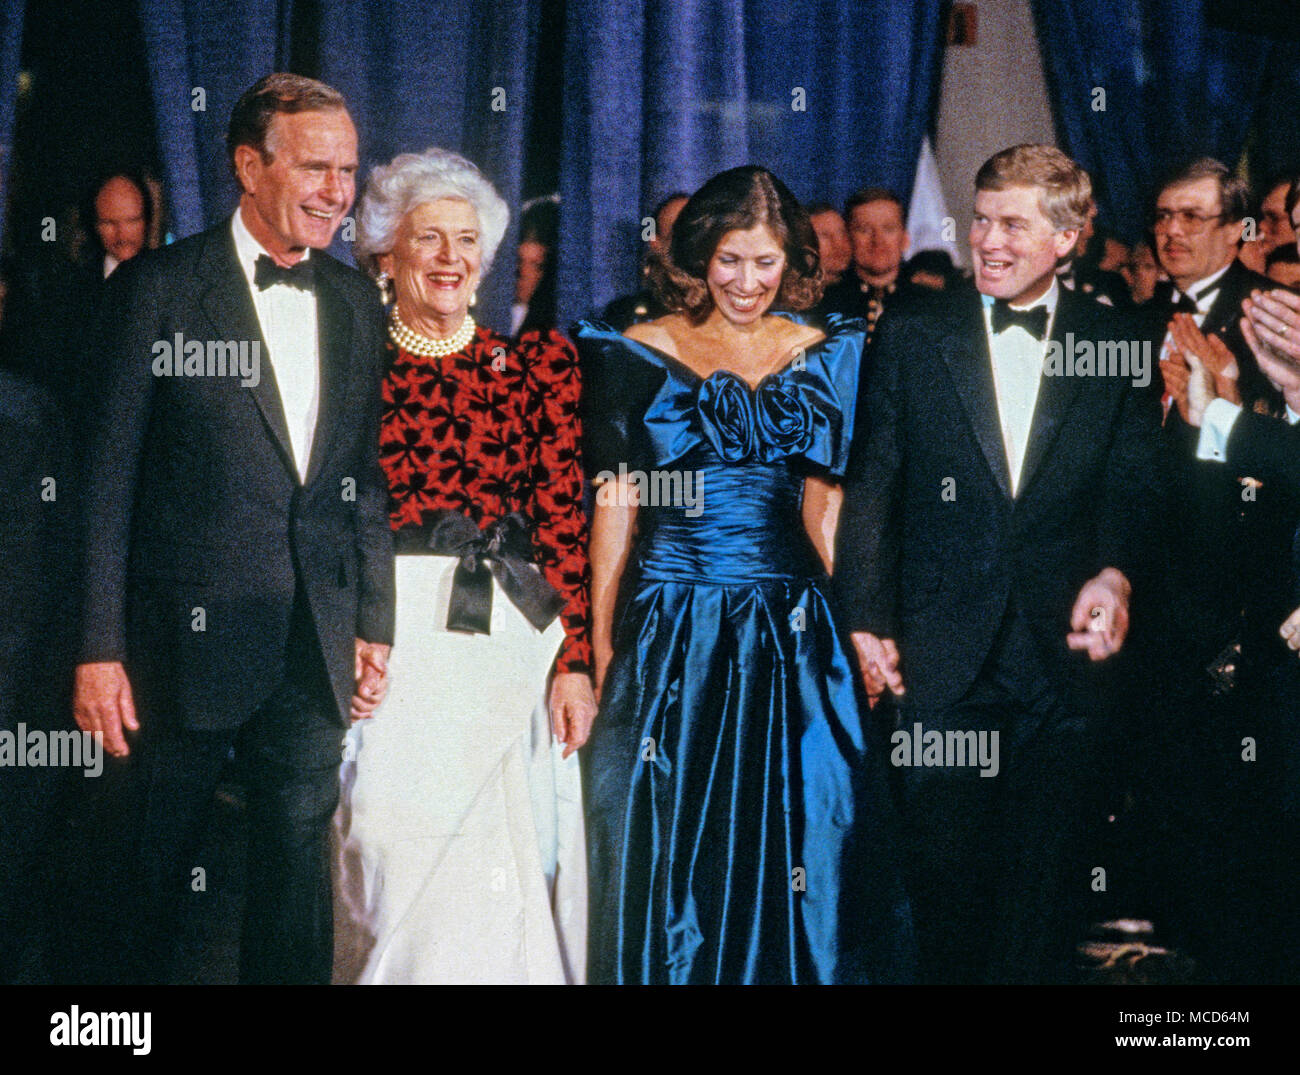 From left to right: United States President-elect George H.W. Bush, Barbara Bush, Marilyn Quayle, and US Vice President-elect Dan Quayle, attends the Inaugural Gala at the Washington DC Convention Center in Washington, DC on January 18 1989. Credit: David Burnett/Pool via CNP /MediaPunch Stock Photo